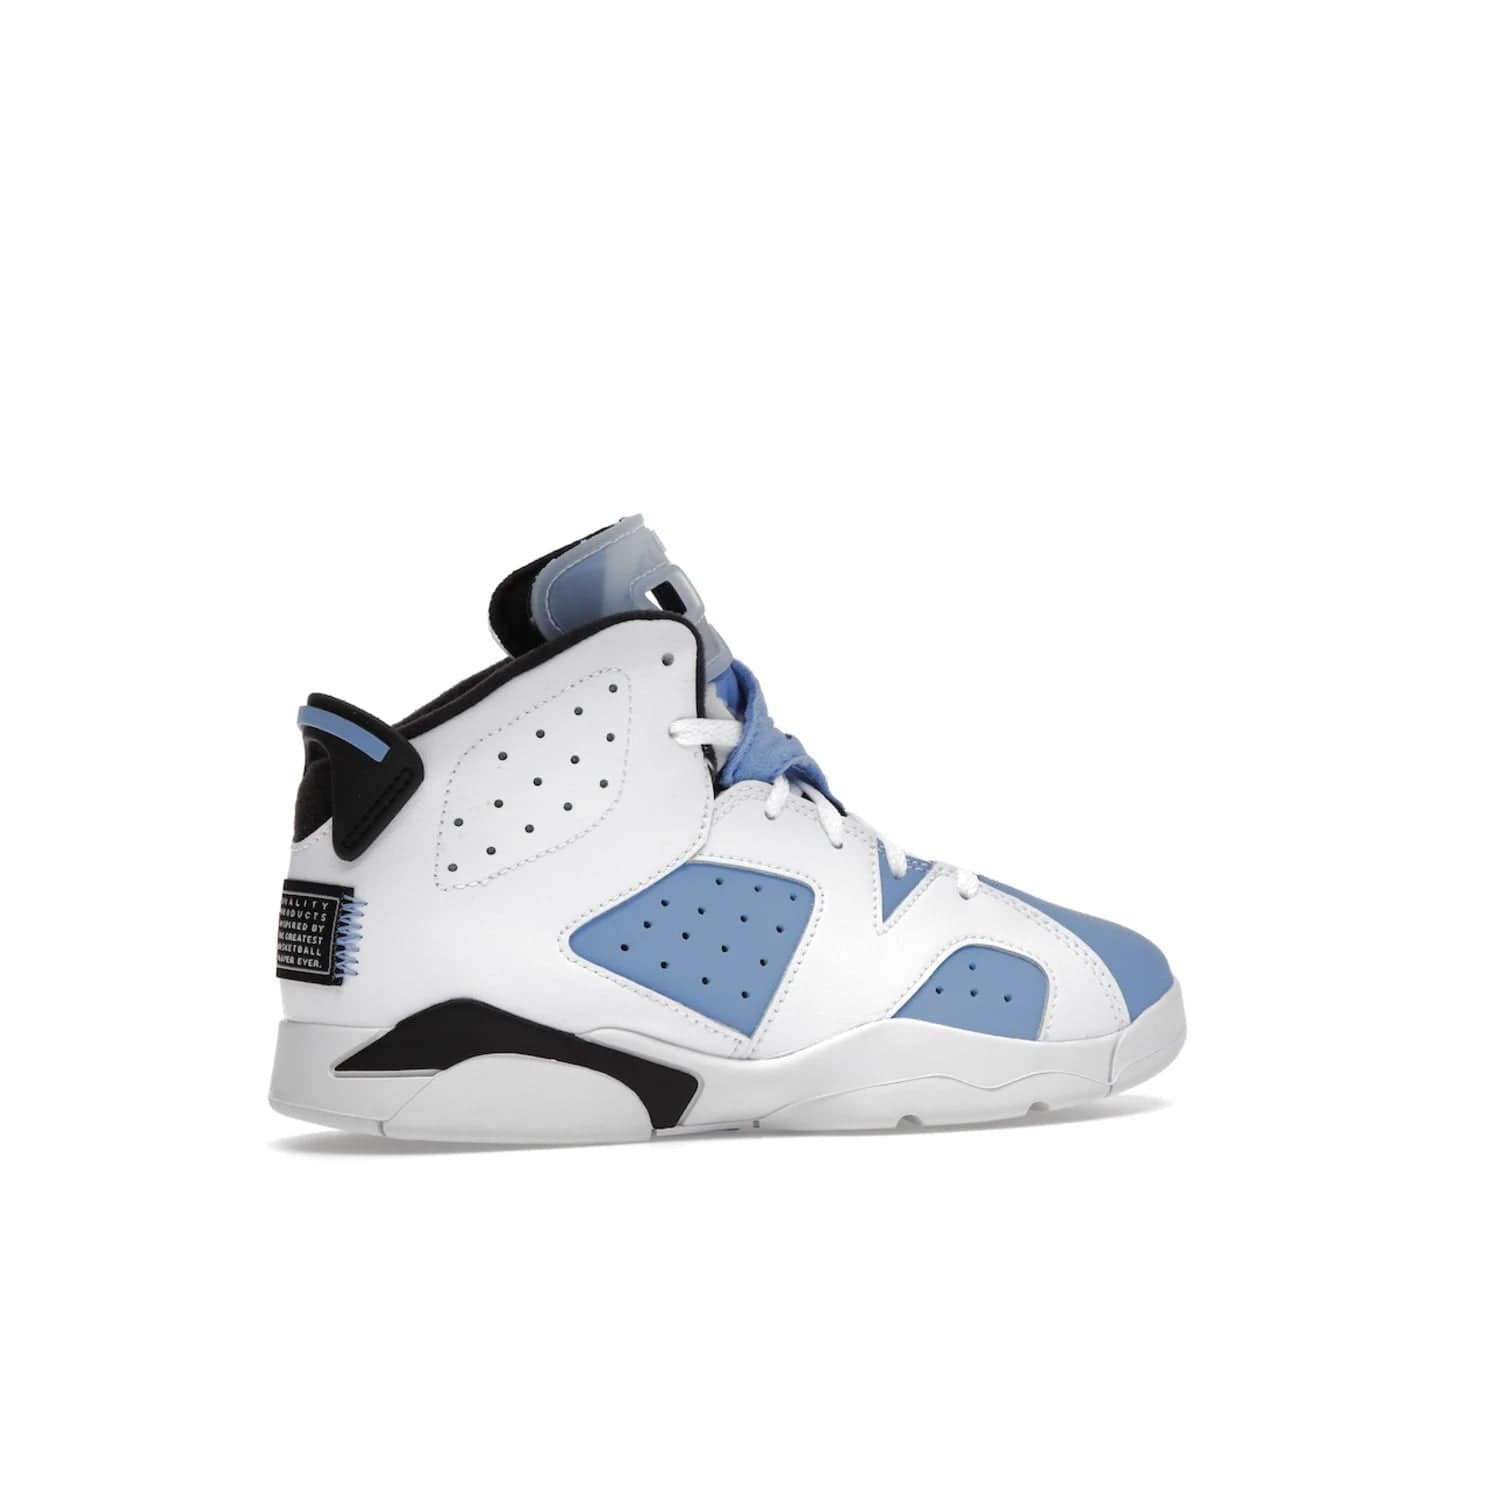 Jordan 6 Retro UNC White (PS) - Image 35 - Only at www.BallersClubKickz.com - The Air Jordan 6 Retro UNC White PS celebrates Michael Jordan's alma mater, the University of North Carolina. It features a classic color-blocking of the iconic Jordan 6 Carmine and a stitched Jordan Team patch. This must-have sneaker released on April 27th, 2022. Referencing the university colors, get this shoe for a stylish and timeless style with university pride.